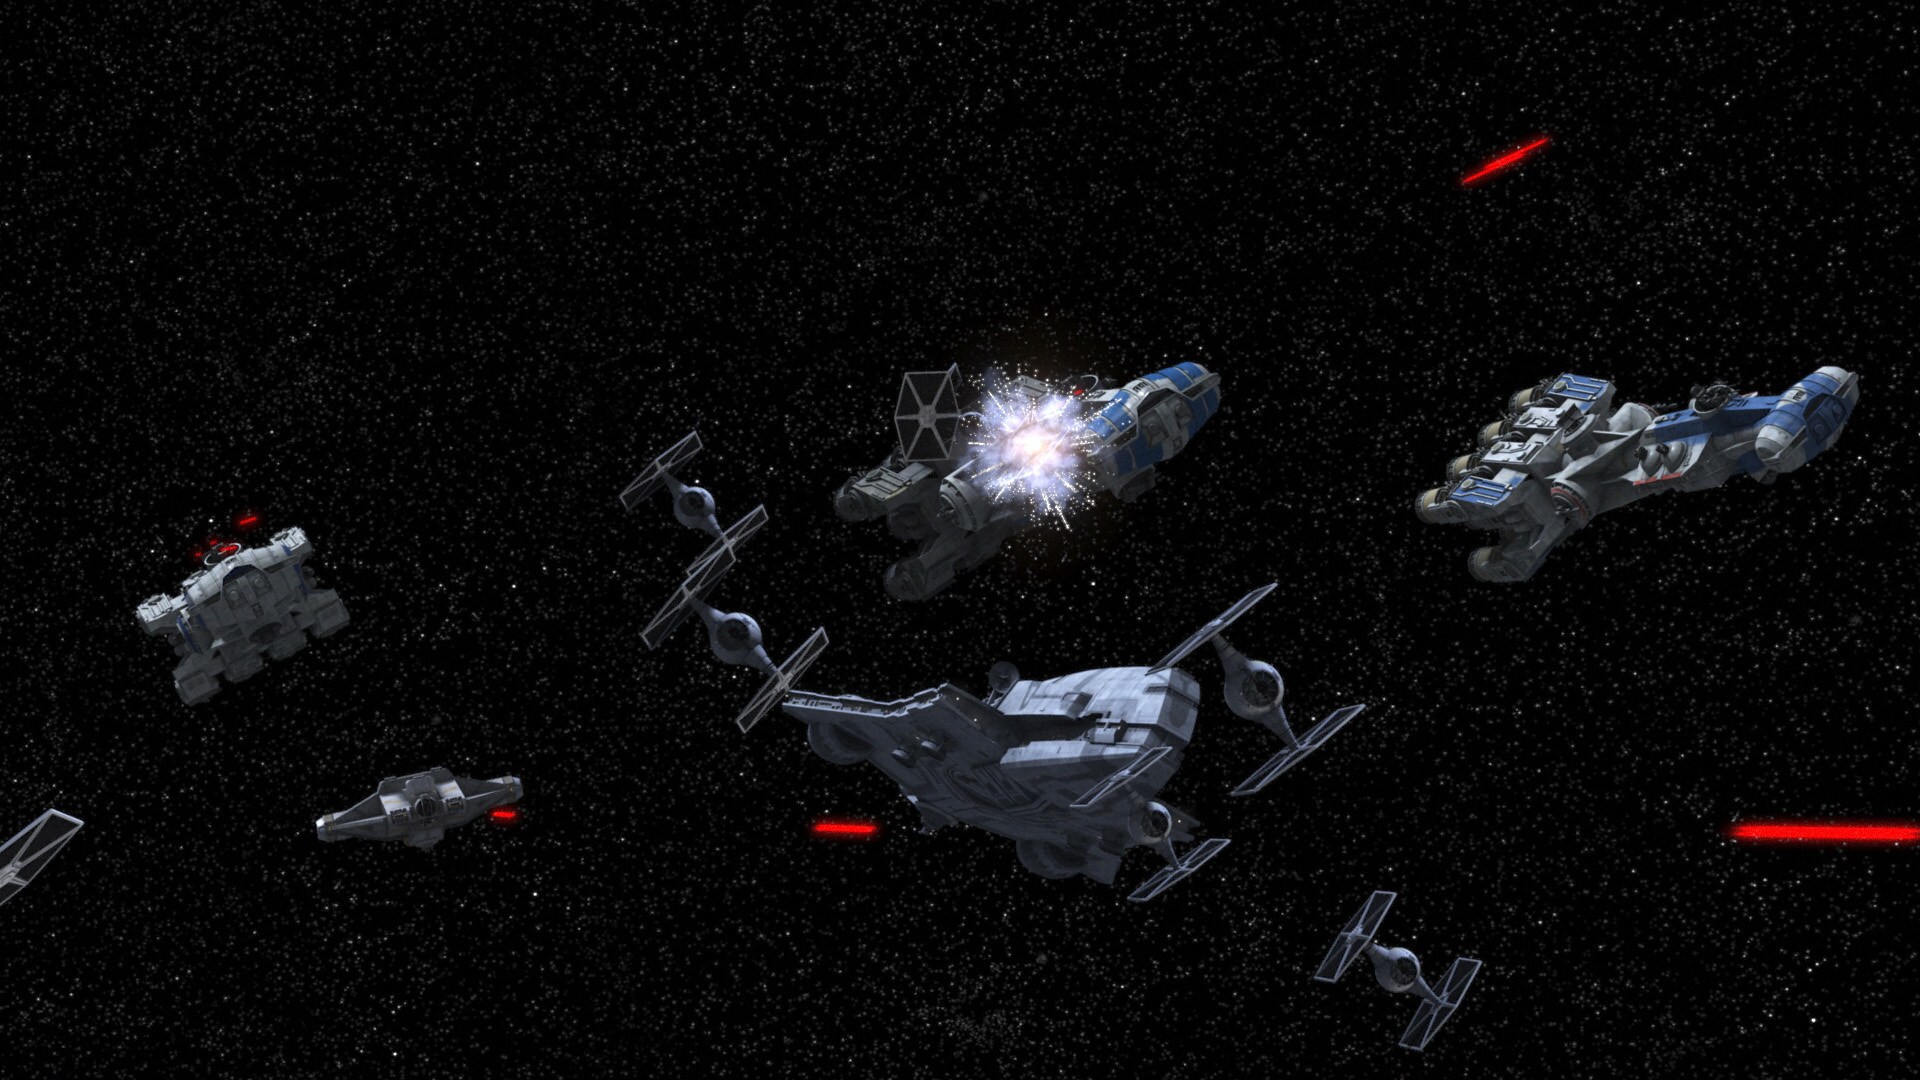 One of the Rebel blockade runners seen at the end of the episode has blue markings inspired by a ...